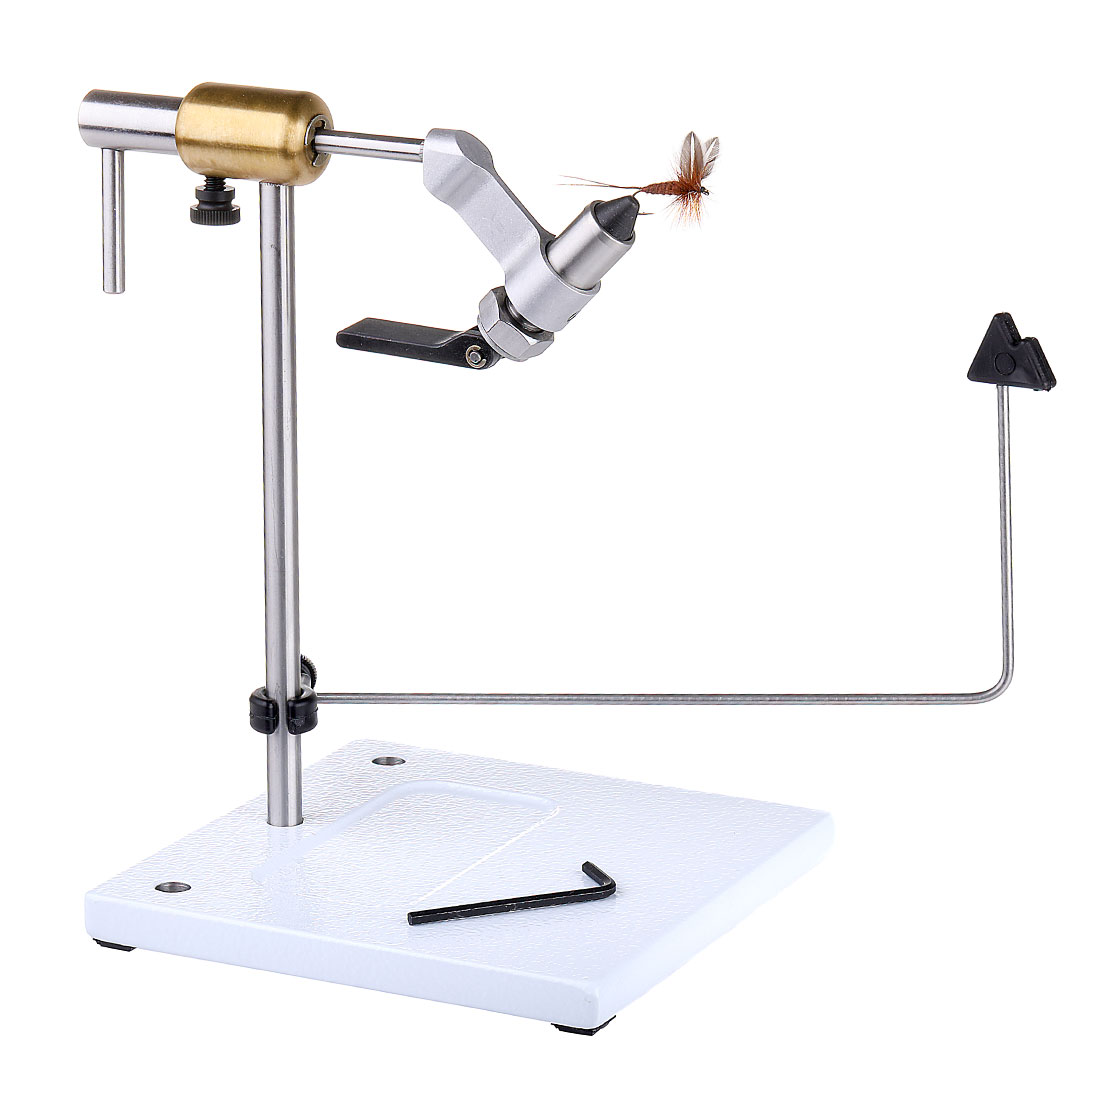 perfk Fly Tying Vise Fly Tying Vice with Hardened Steel Jaw